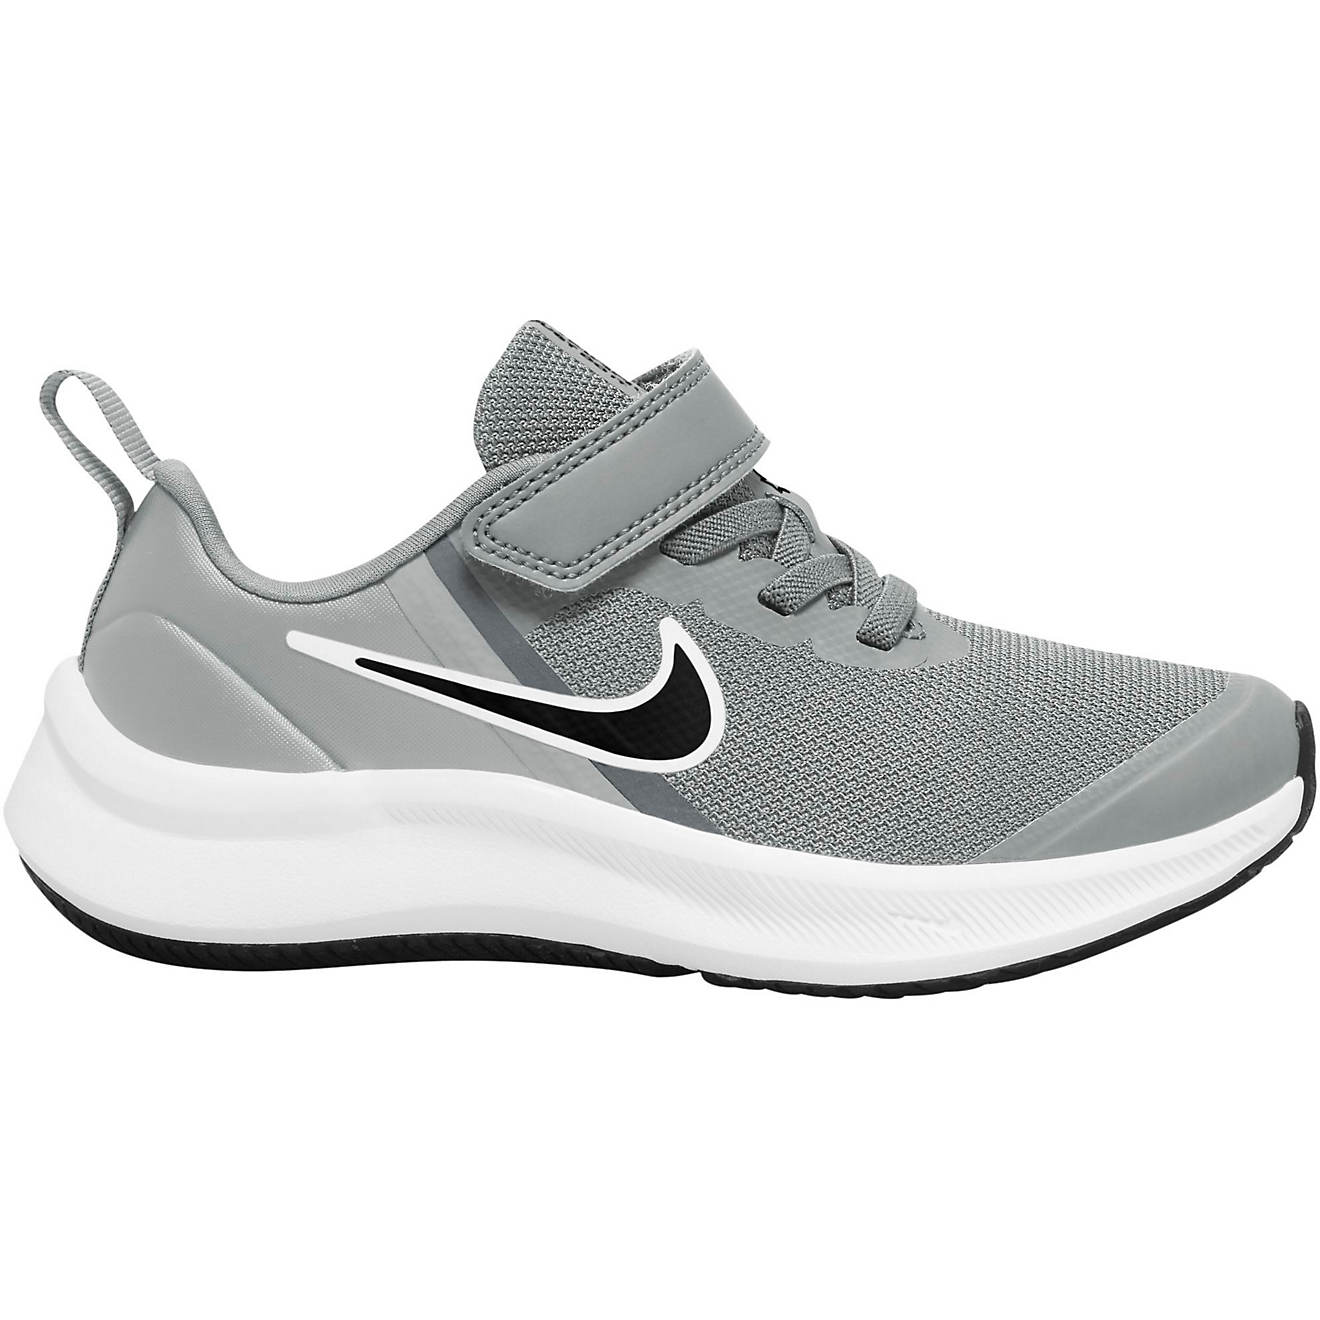 Nike Kids' Star Runner 3 Pre-School Running Shoes on Sale At Academy Sports + Outdoors